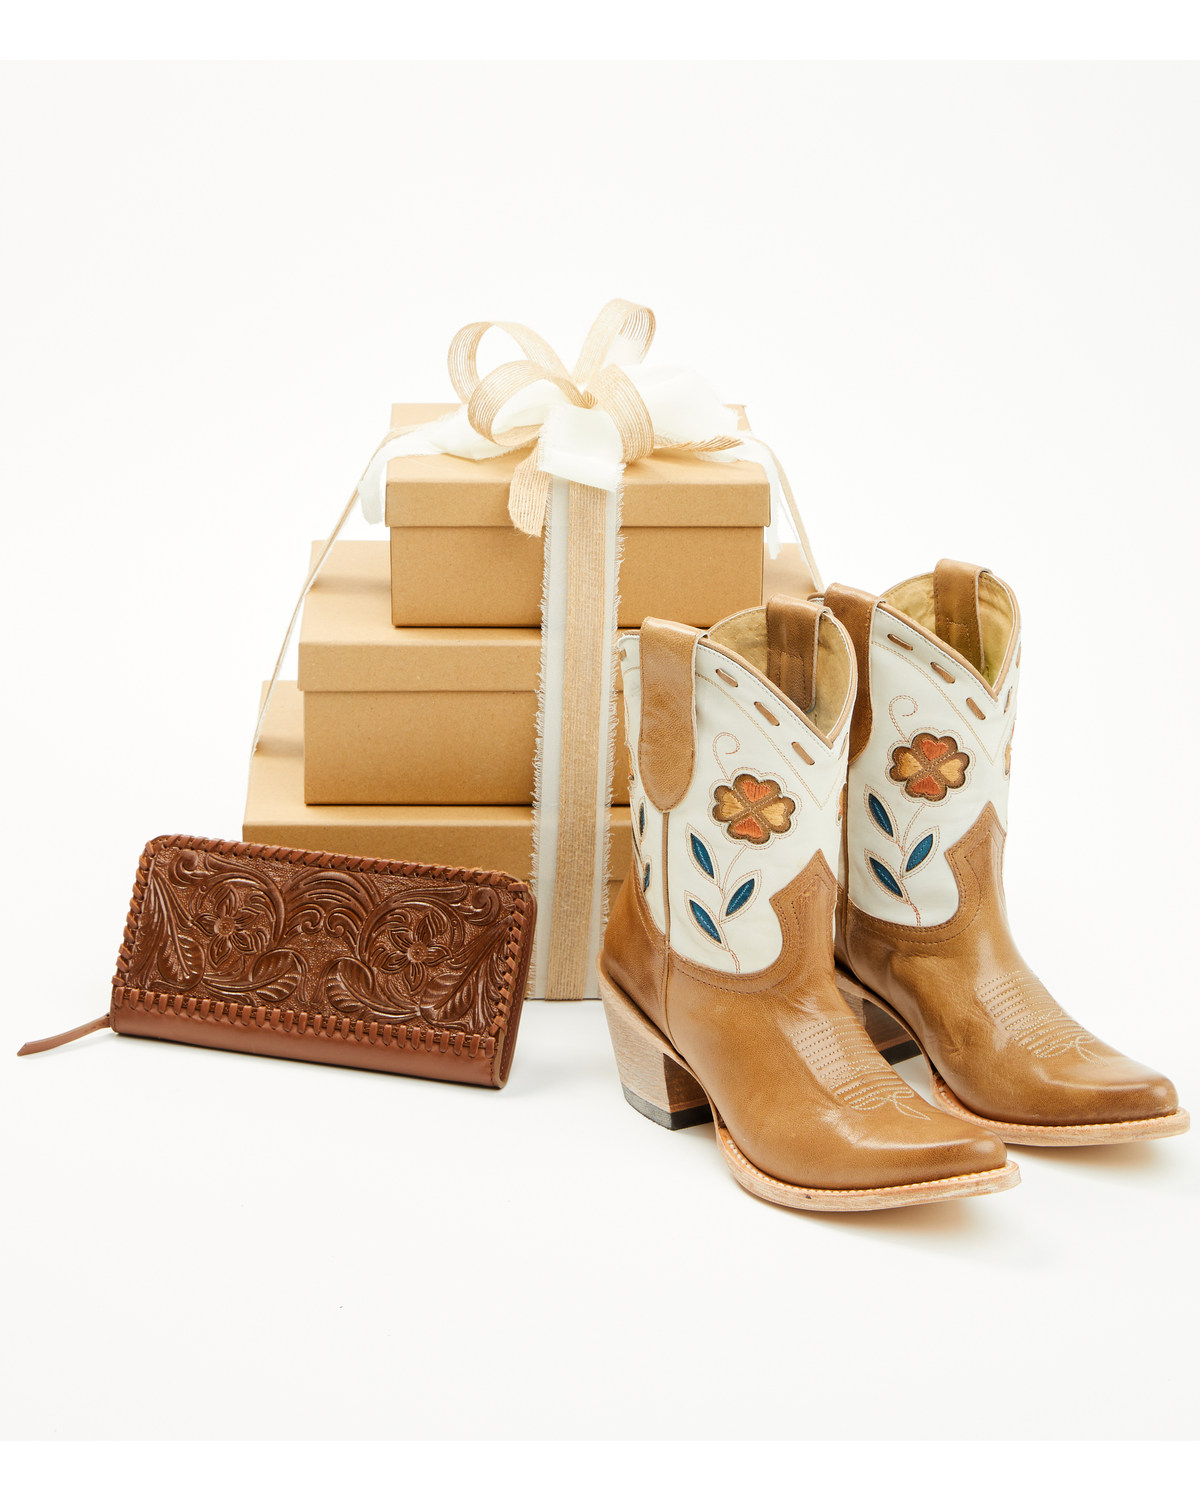 Boot Barn Women's Western Revival Gift Box - Gold Package